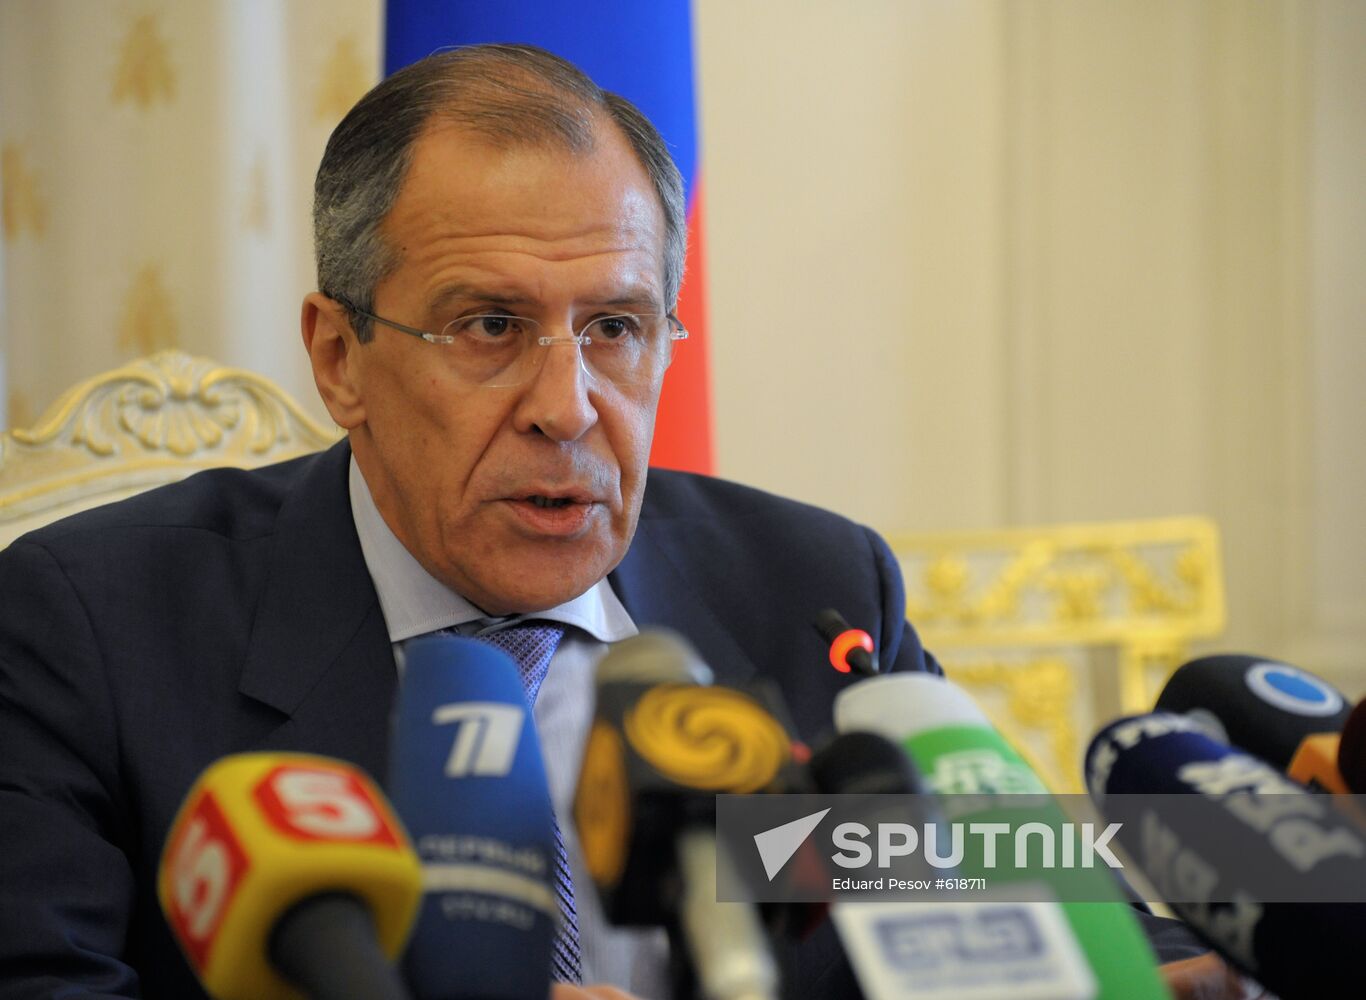 Sergei Lavrov gives news conference